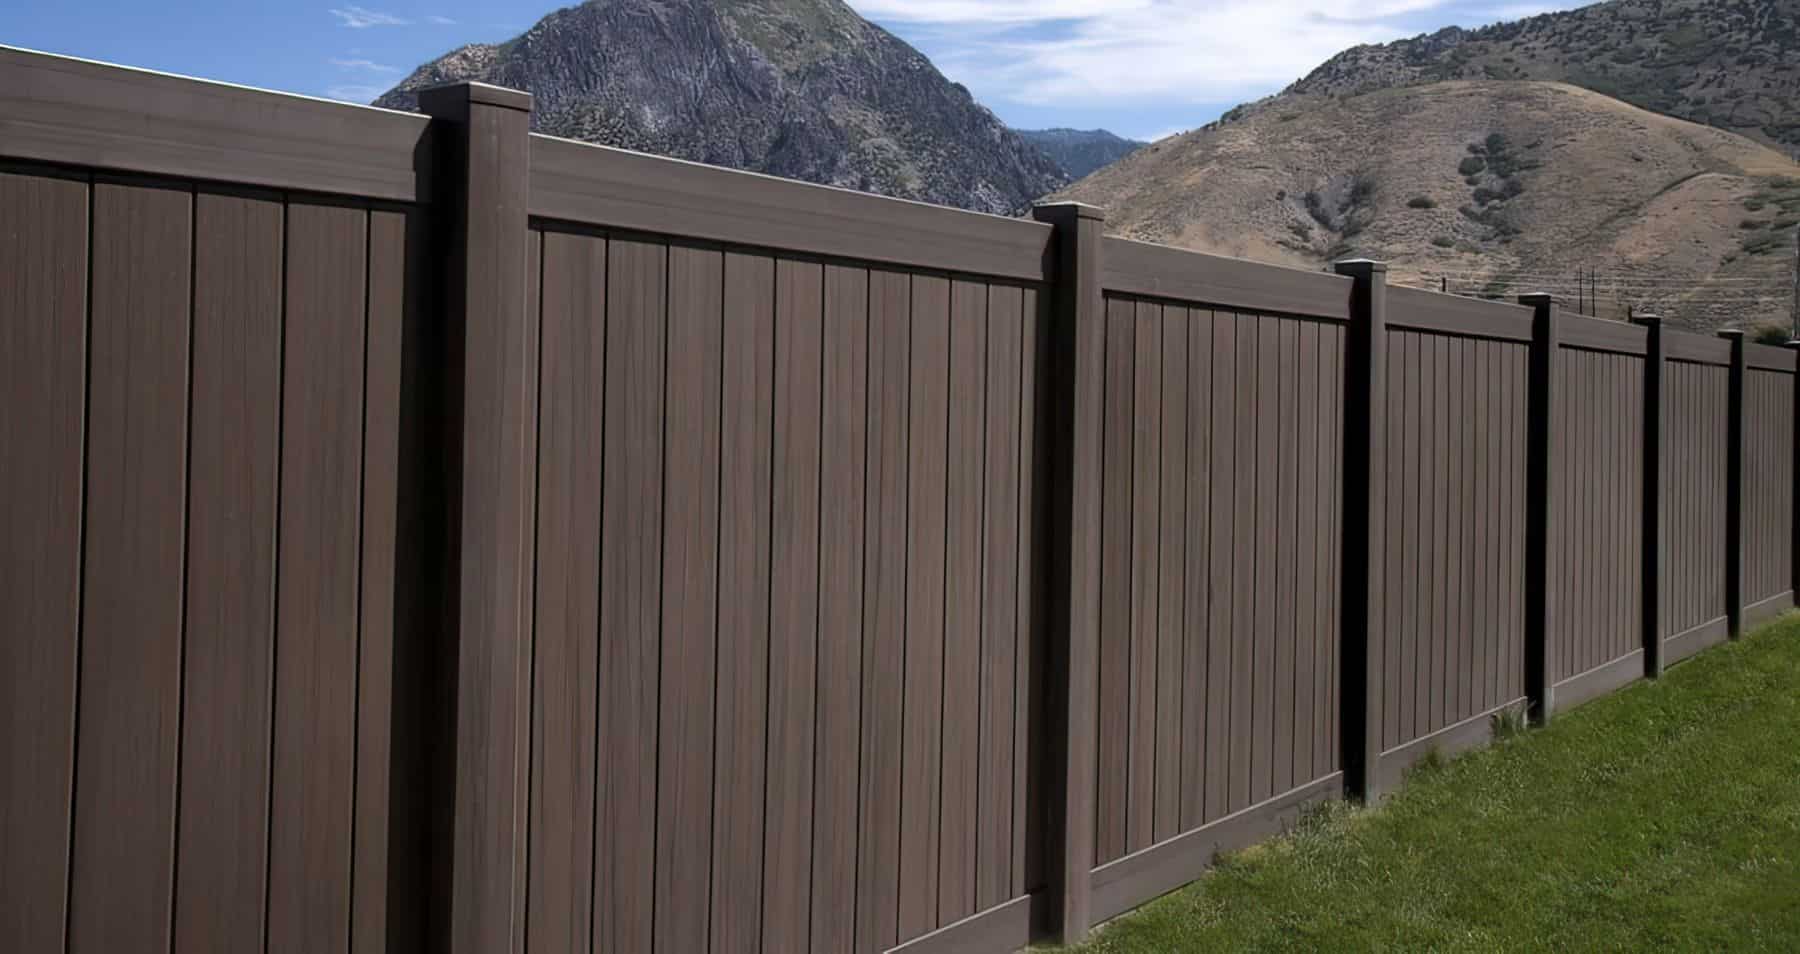 Brown vinyl fence on grassy lawn in front of picturesque view of mountains under a blue sky